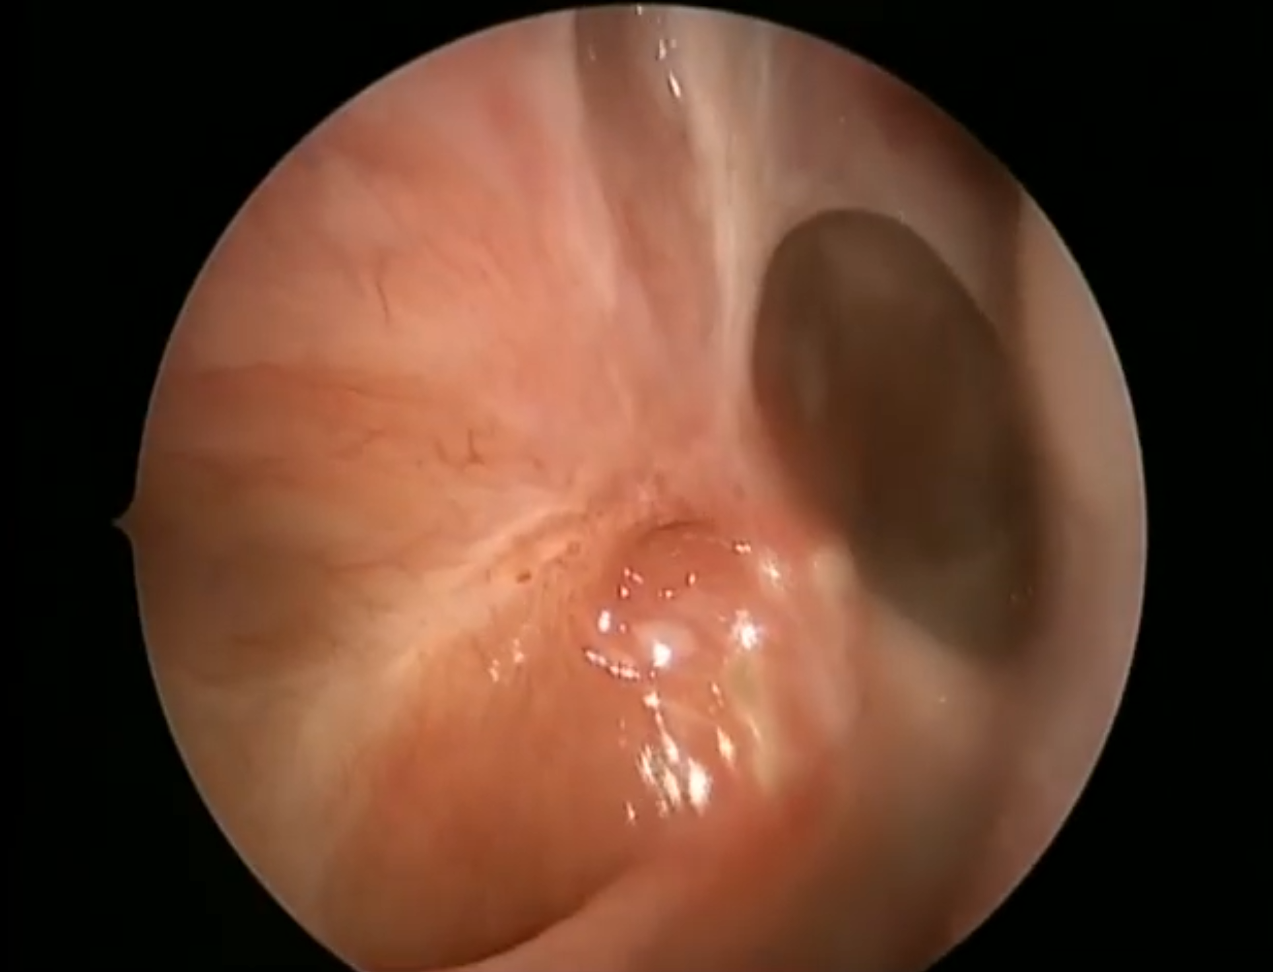 Video - Sinuses patent after sinus surgery